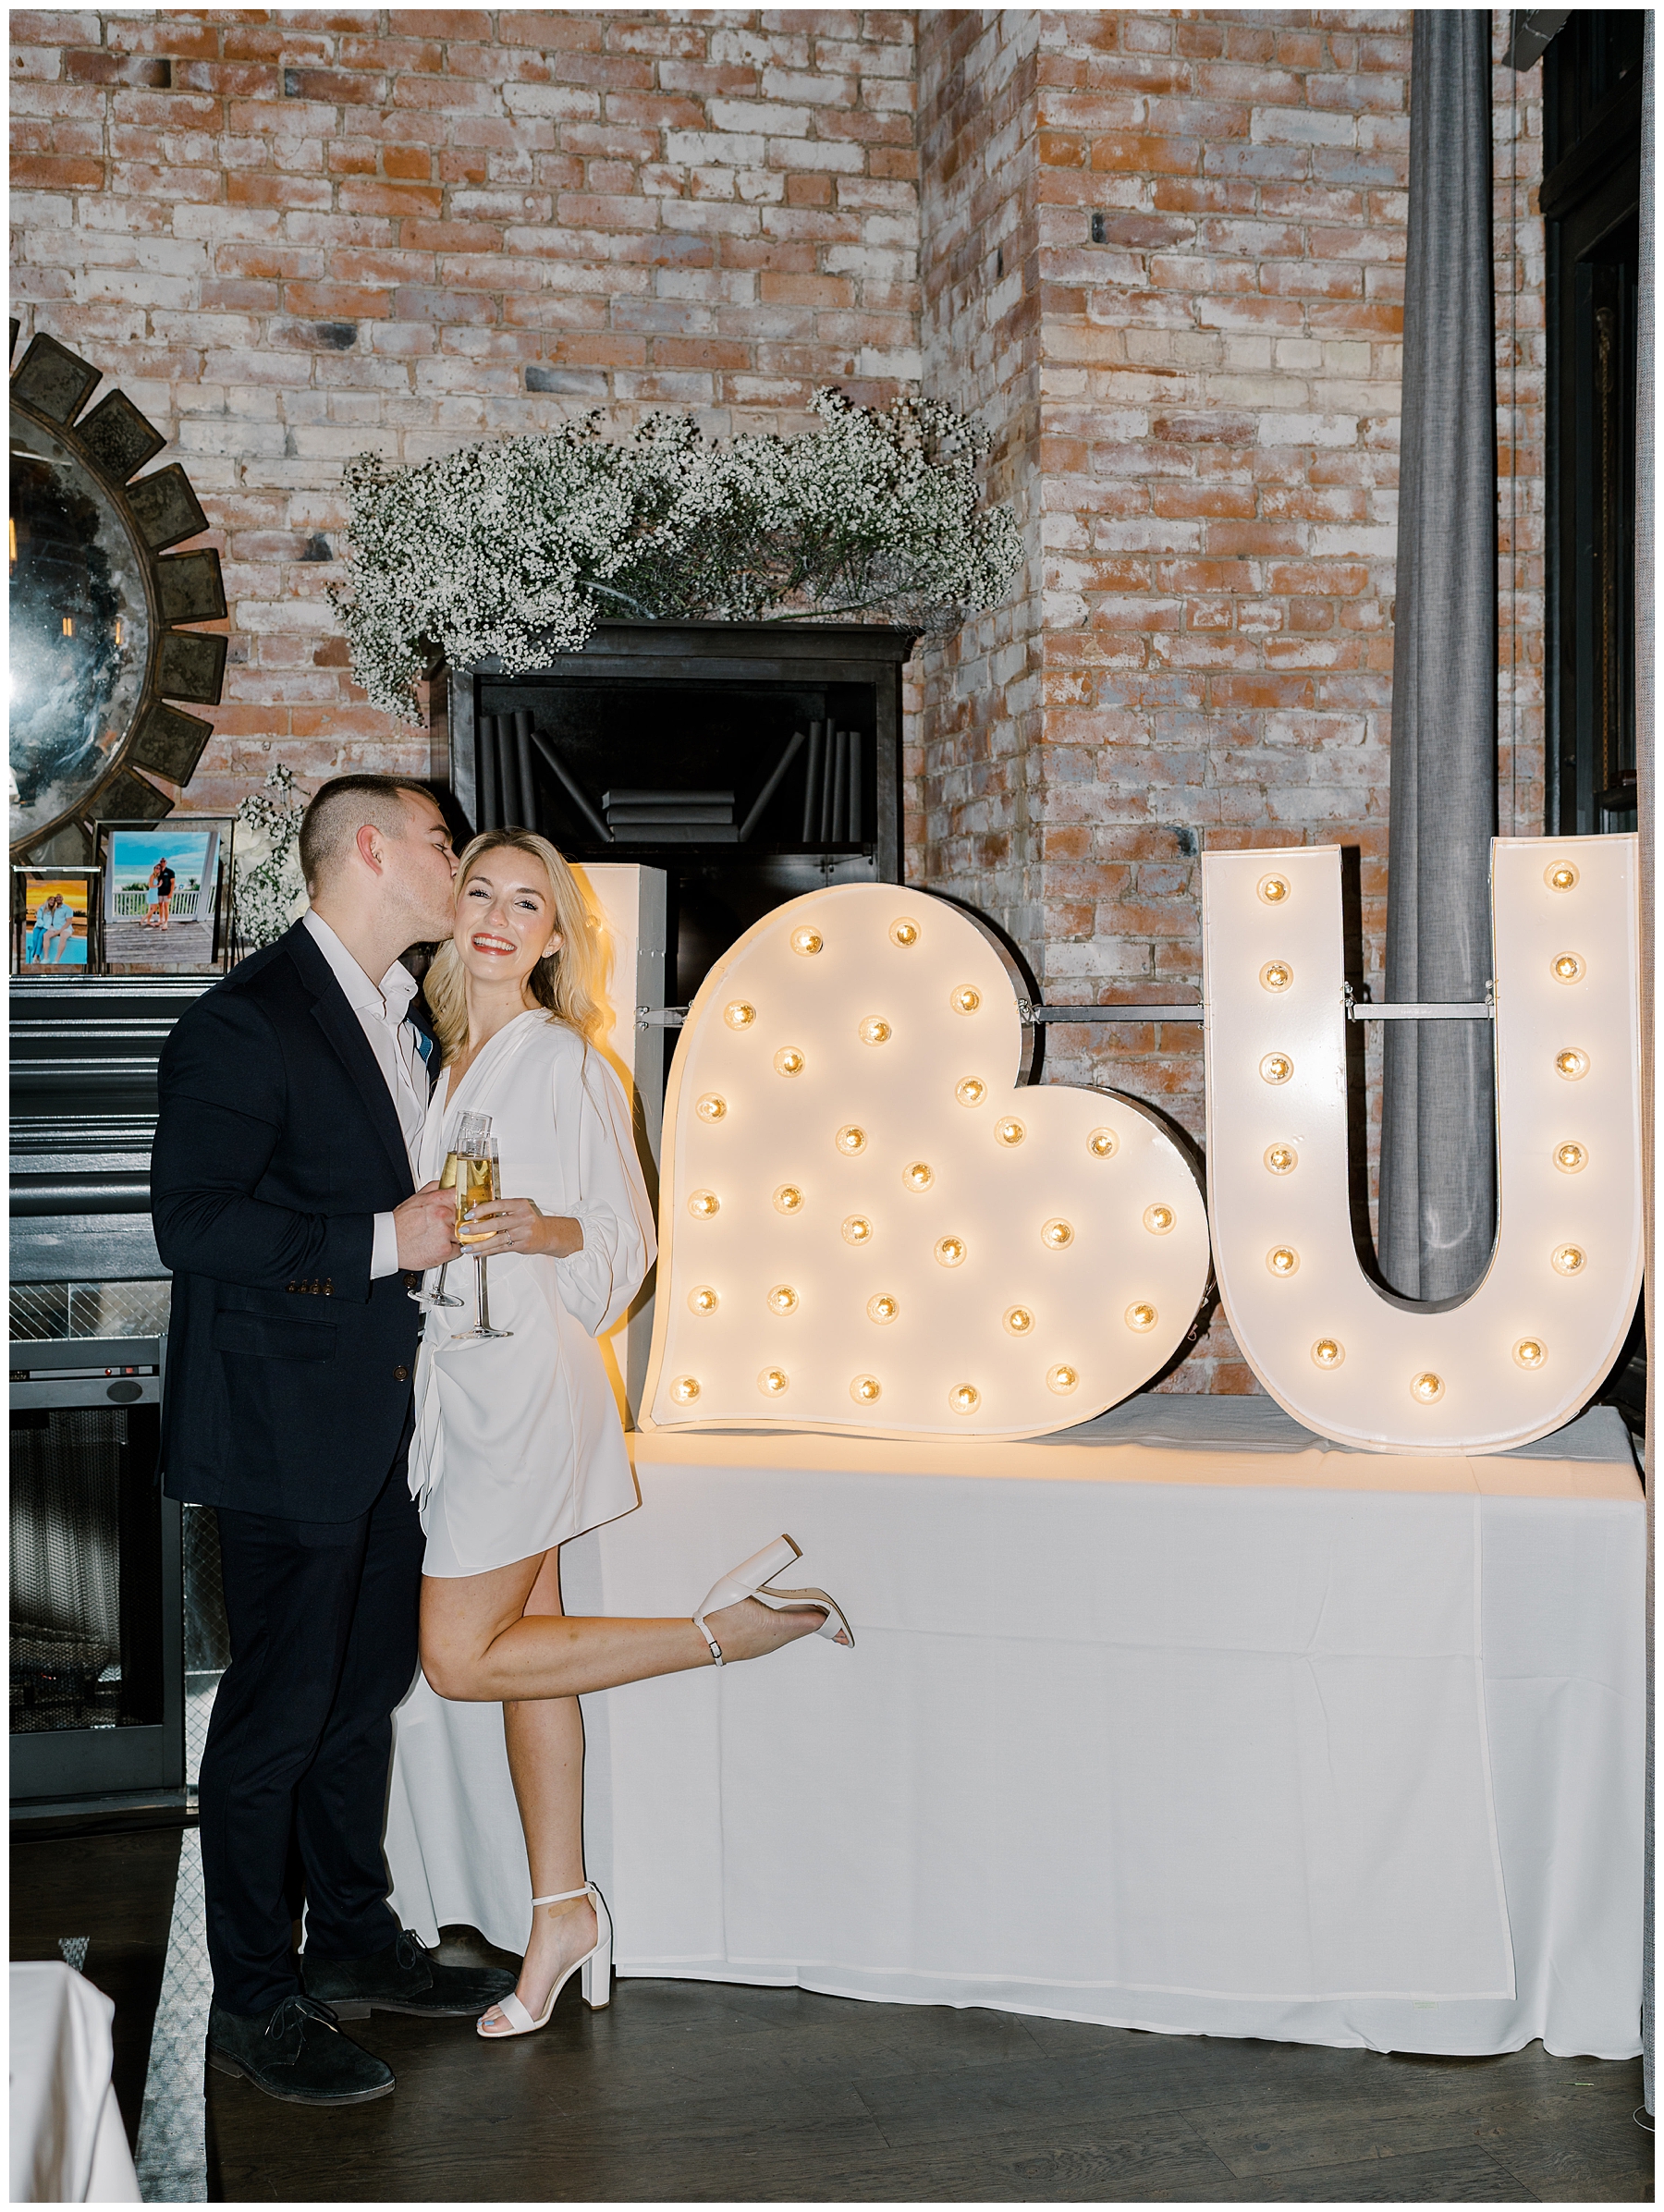 nelwy engaged couple stand by large light up I Love you sign 